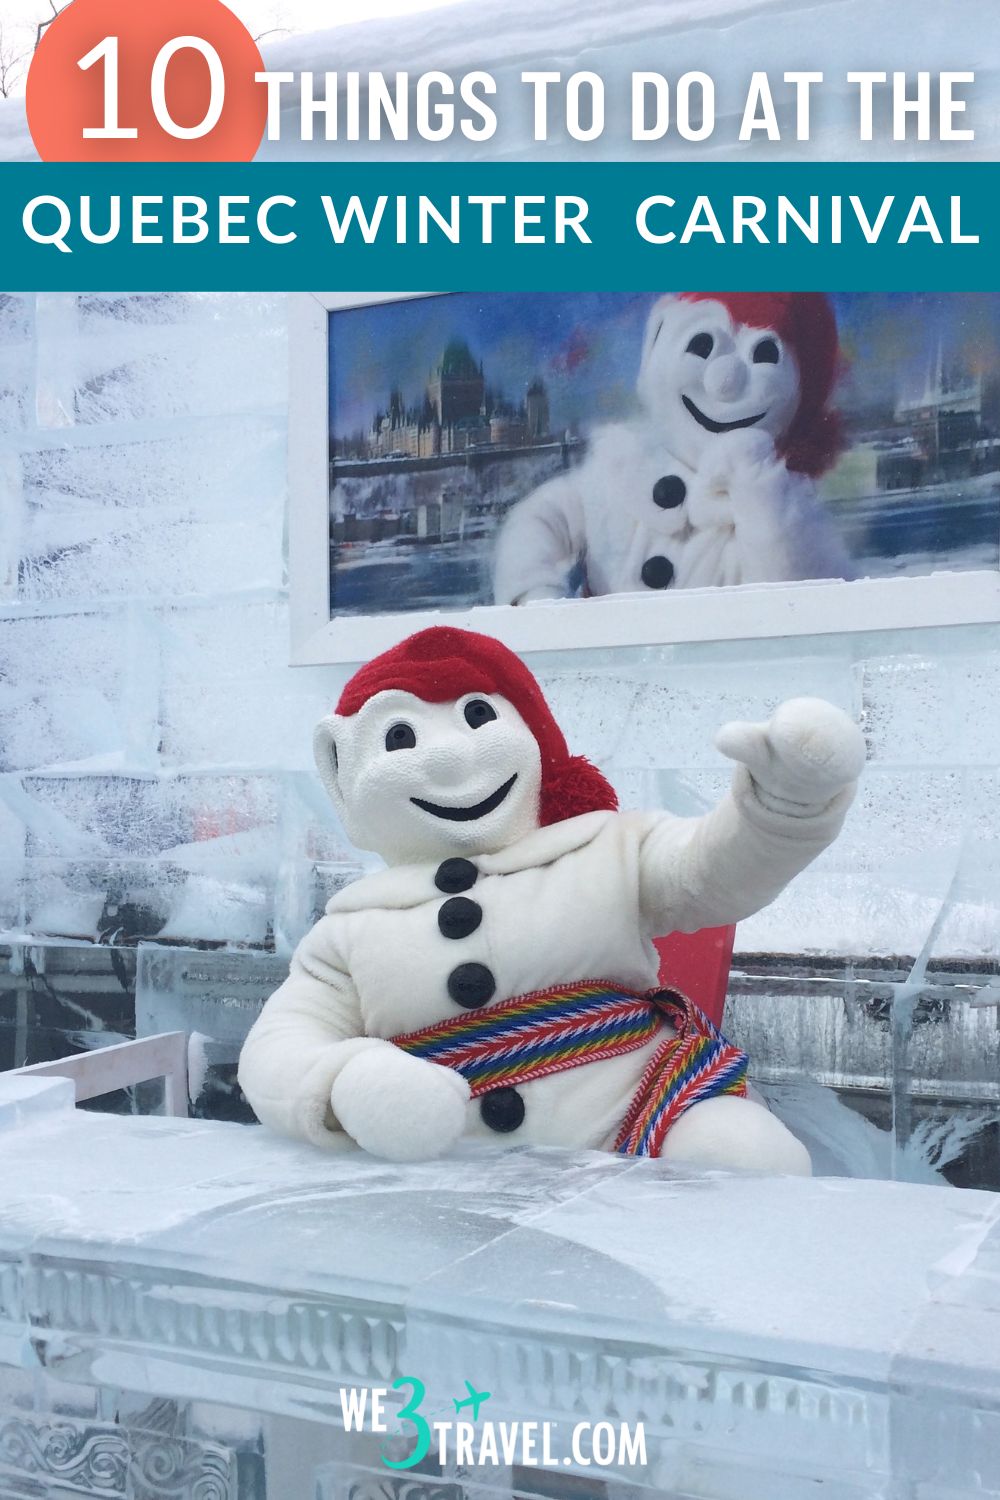 10 Things to do at the Quebec Winter Carnival